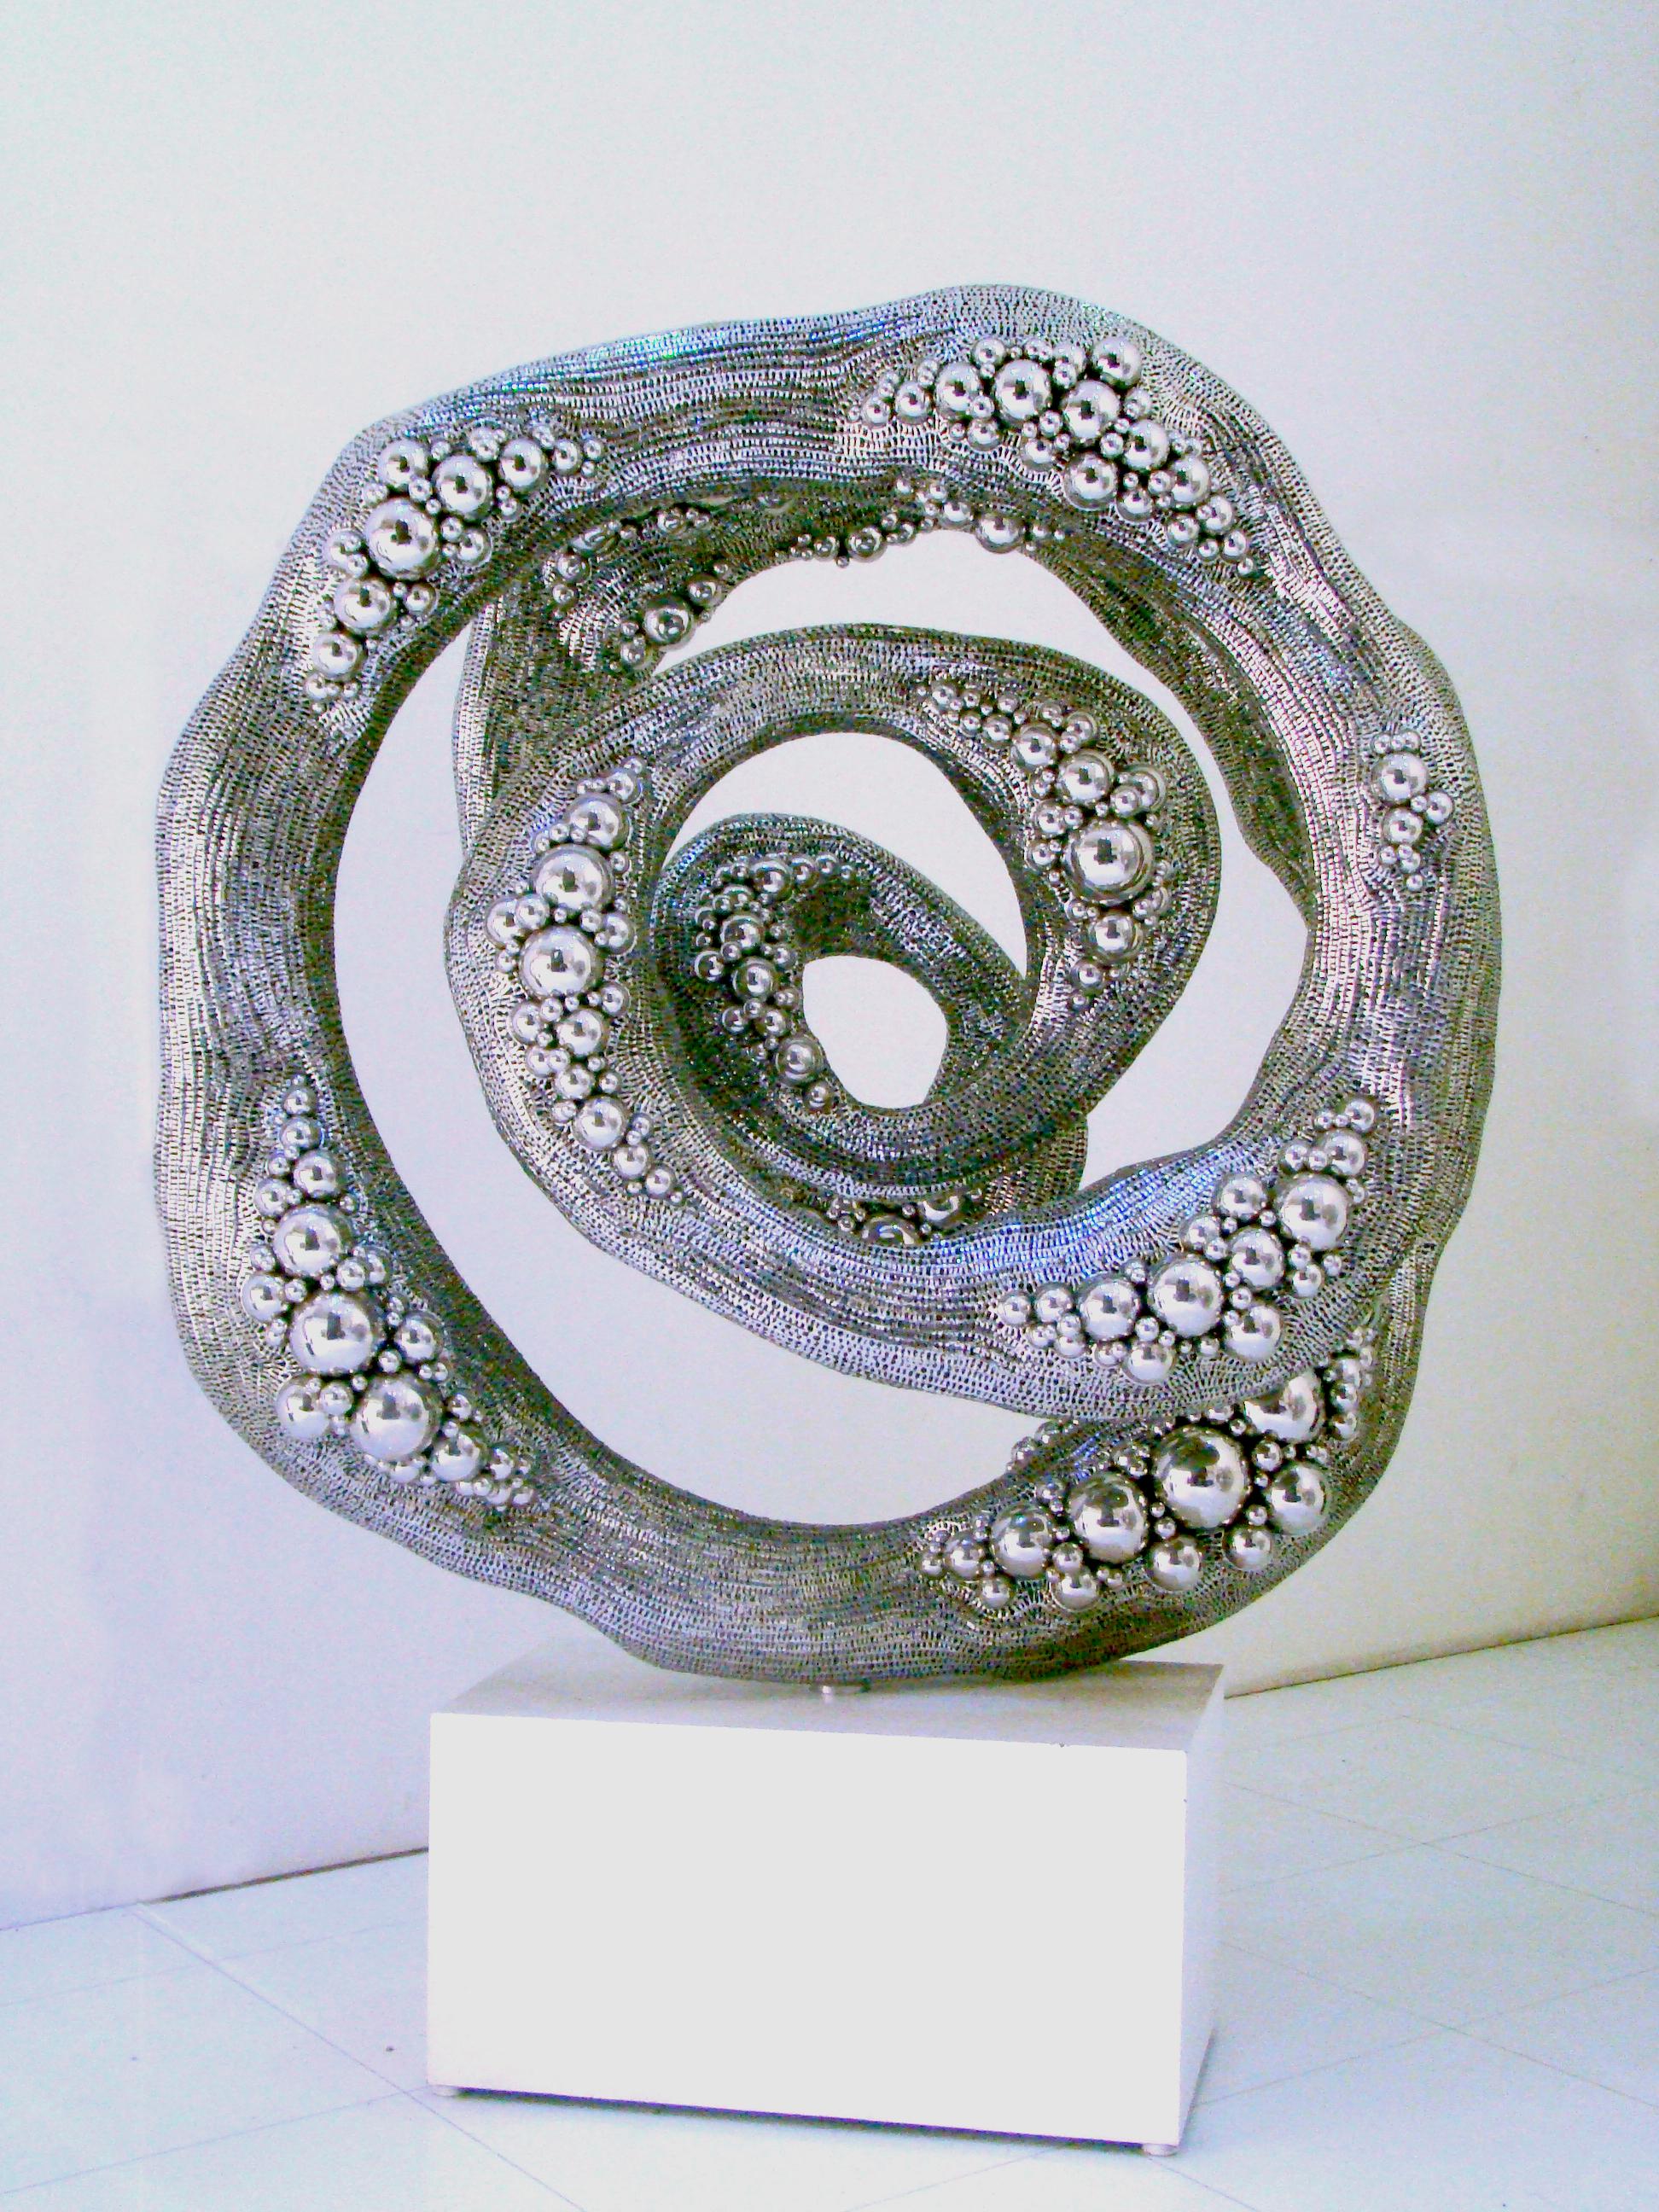 Breathe - 21st Cent, Contemporary, Abstract Sculpture, Stainless Steel, Marble